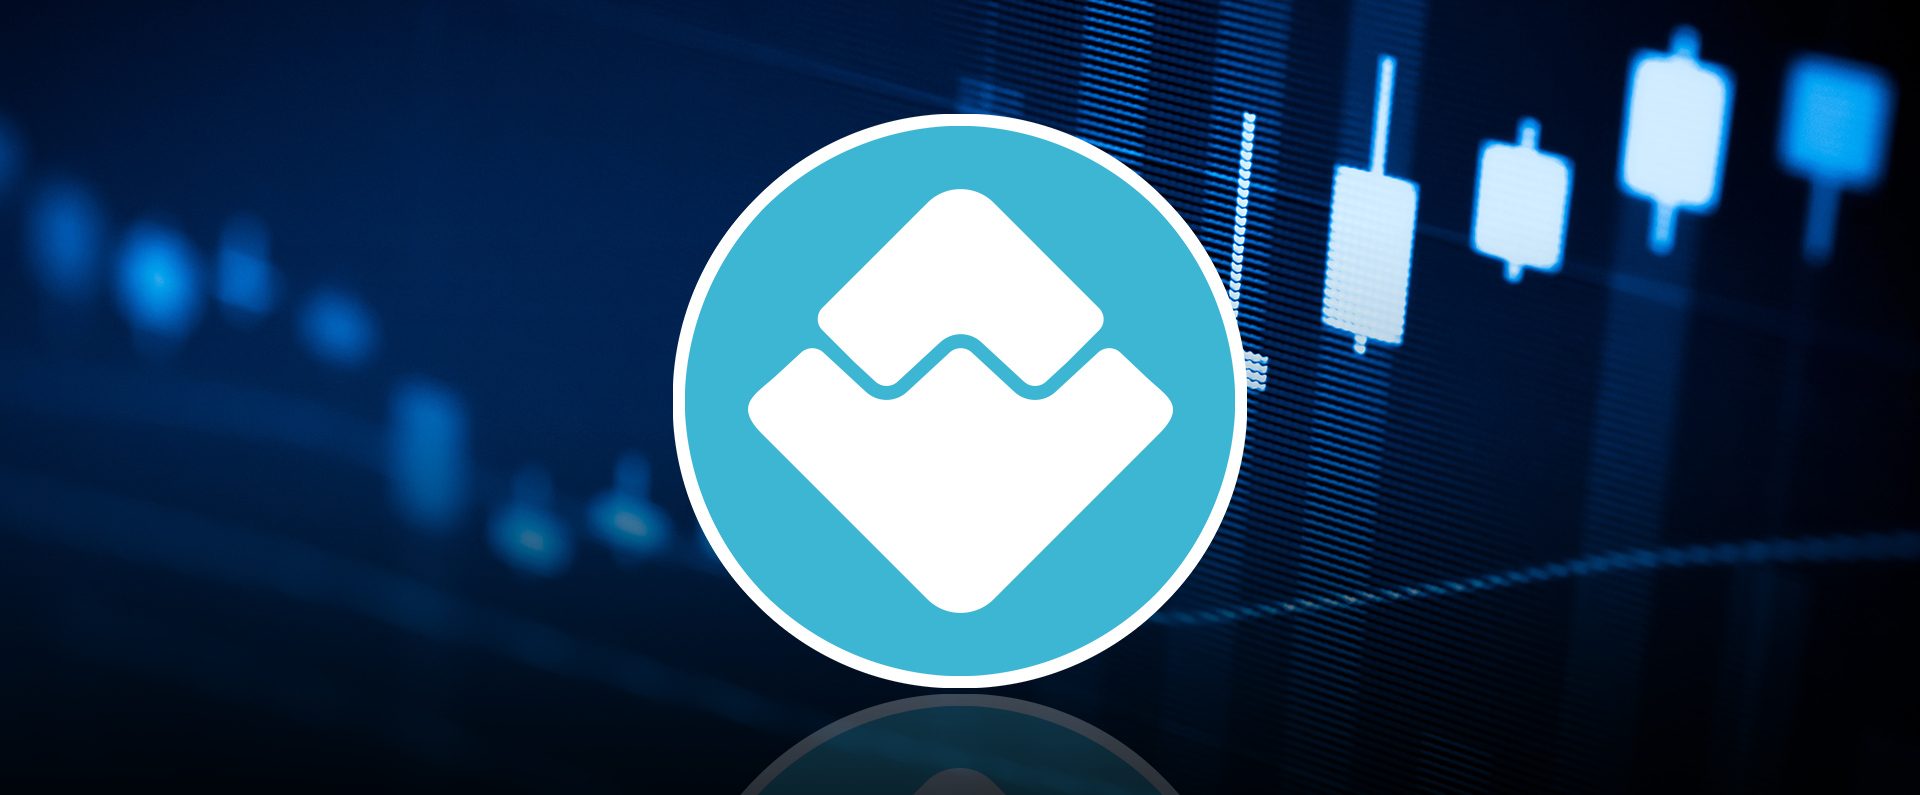 Waves cryptocurrency - what is it?